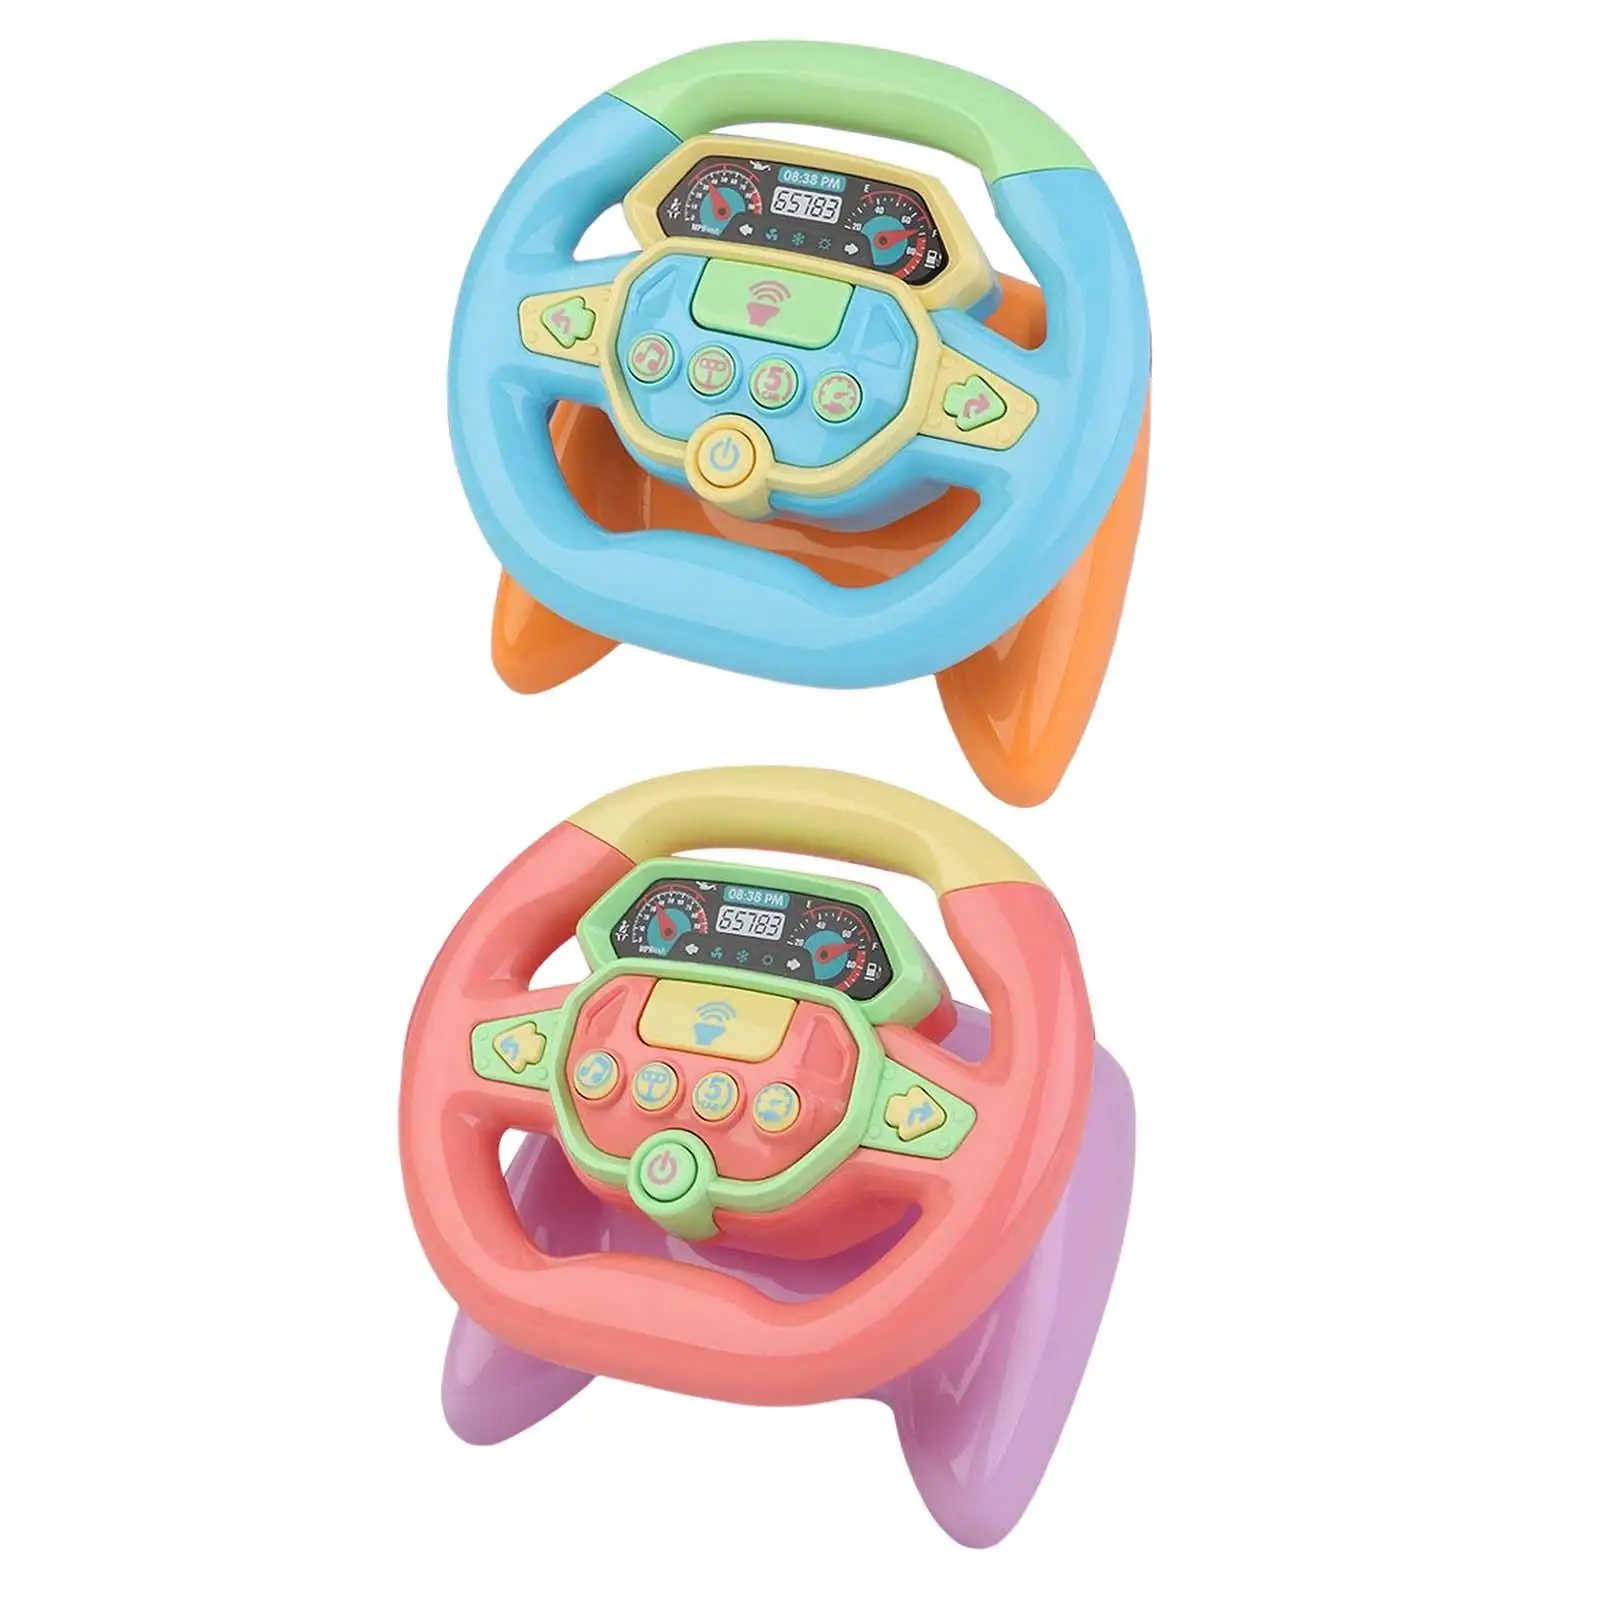 Cars Simulation Steering Wheel Toy Educational Learning Toy Pretend Play Toy